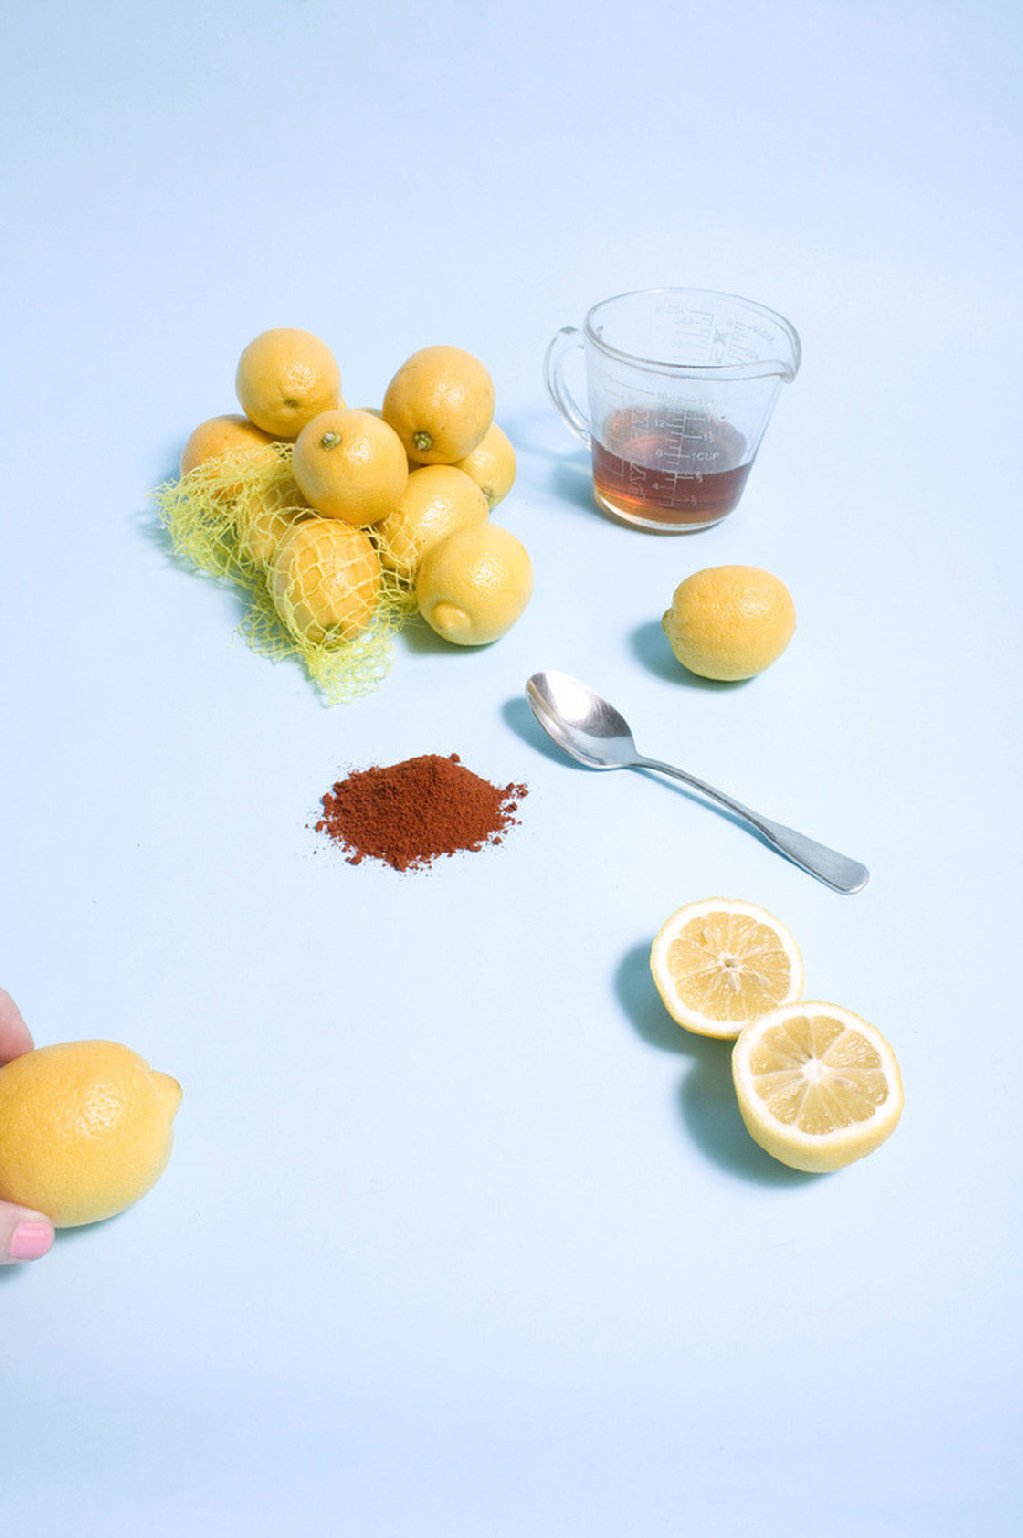 <strong>The Master Cleanse: </strong>Adherents are required to avoid any food and just drink a concoction of water, lemon juice, maple syrup and cayenne pepper to "detoxify" their bodies. As Piper in <em>Orange Is The New Black</em><em> </em><a href="http://www.vulture.com/2013/07/orange-is-the-new-black-recap-season-1-episode-2.html">proves</a>, it's tough to make it through on this meager meal. Photo: Stephanie Gonot/Courtesy of the photographer